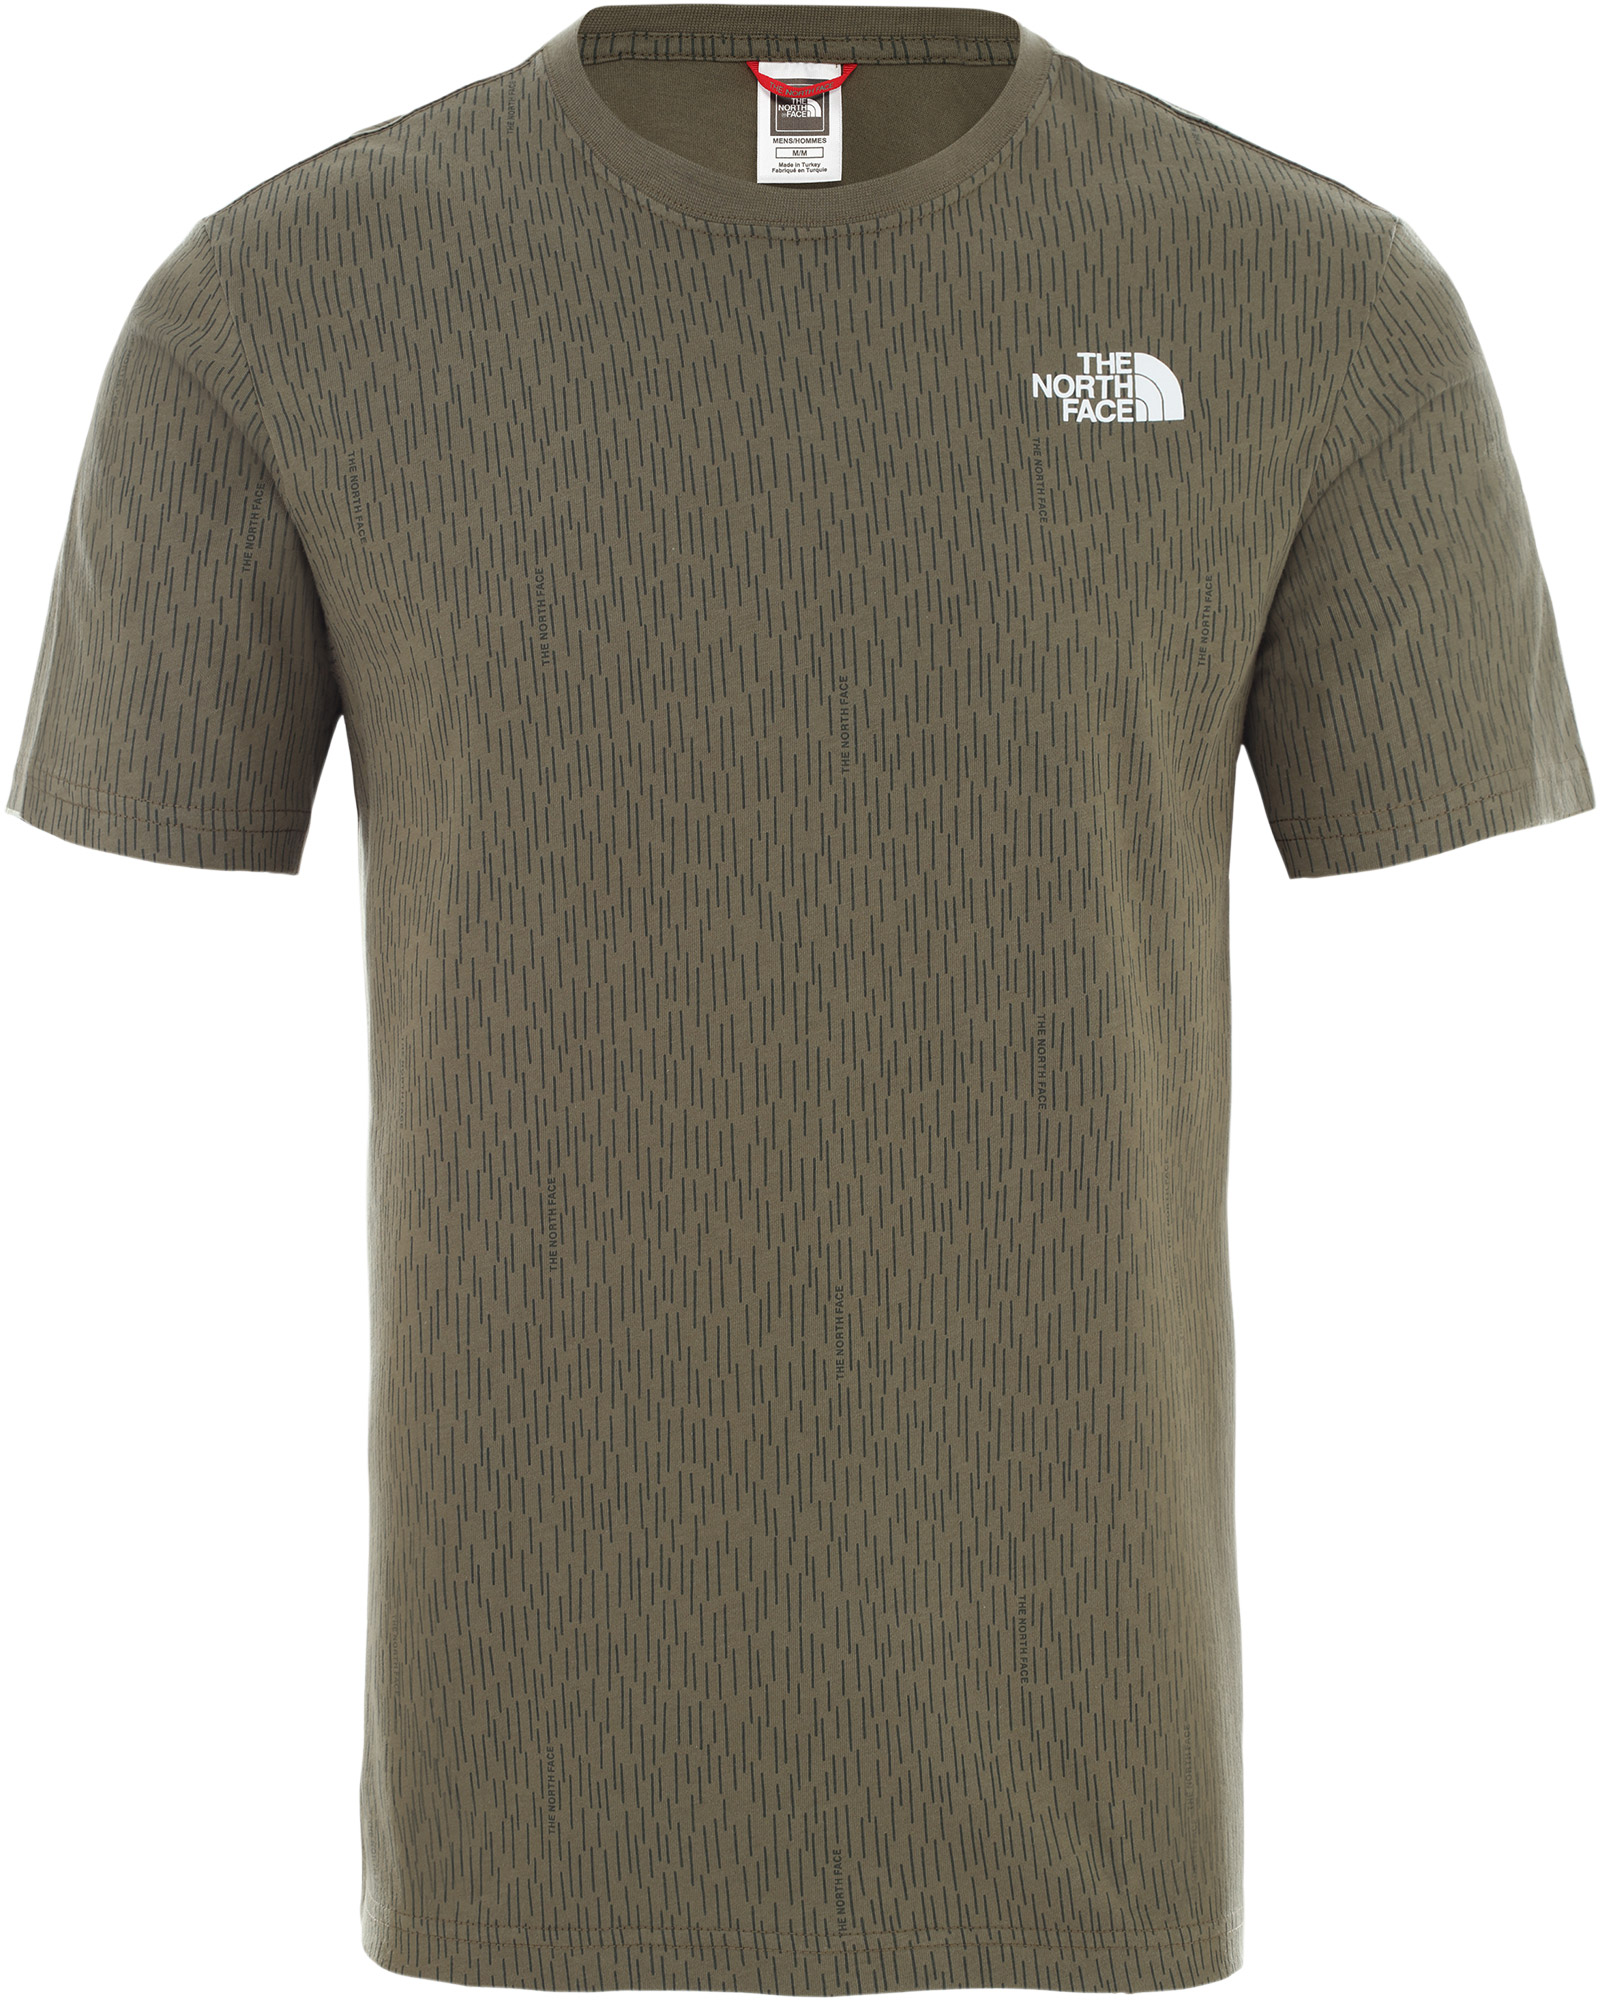 The North Face Red Box Men’s T Shirt - Burnt Olive Green Camo Print XS